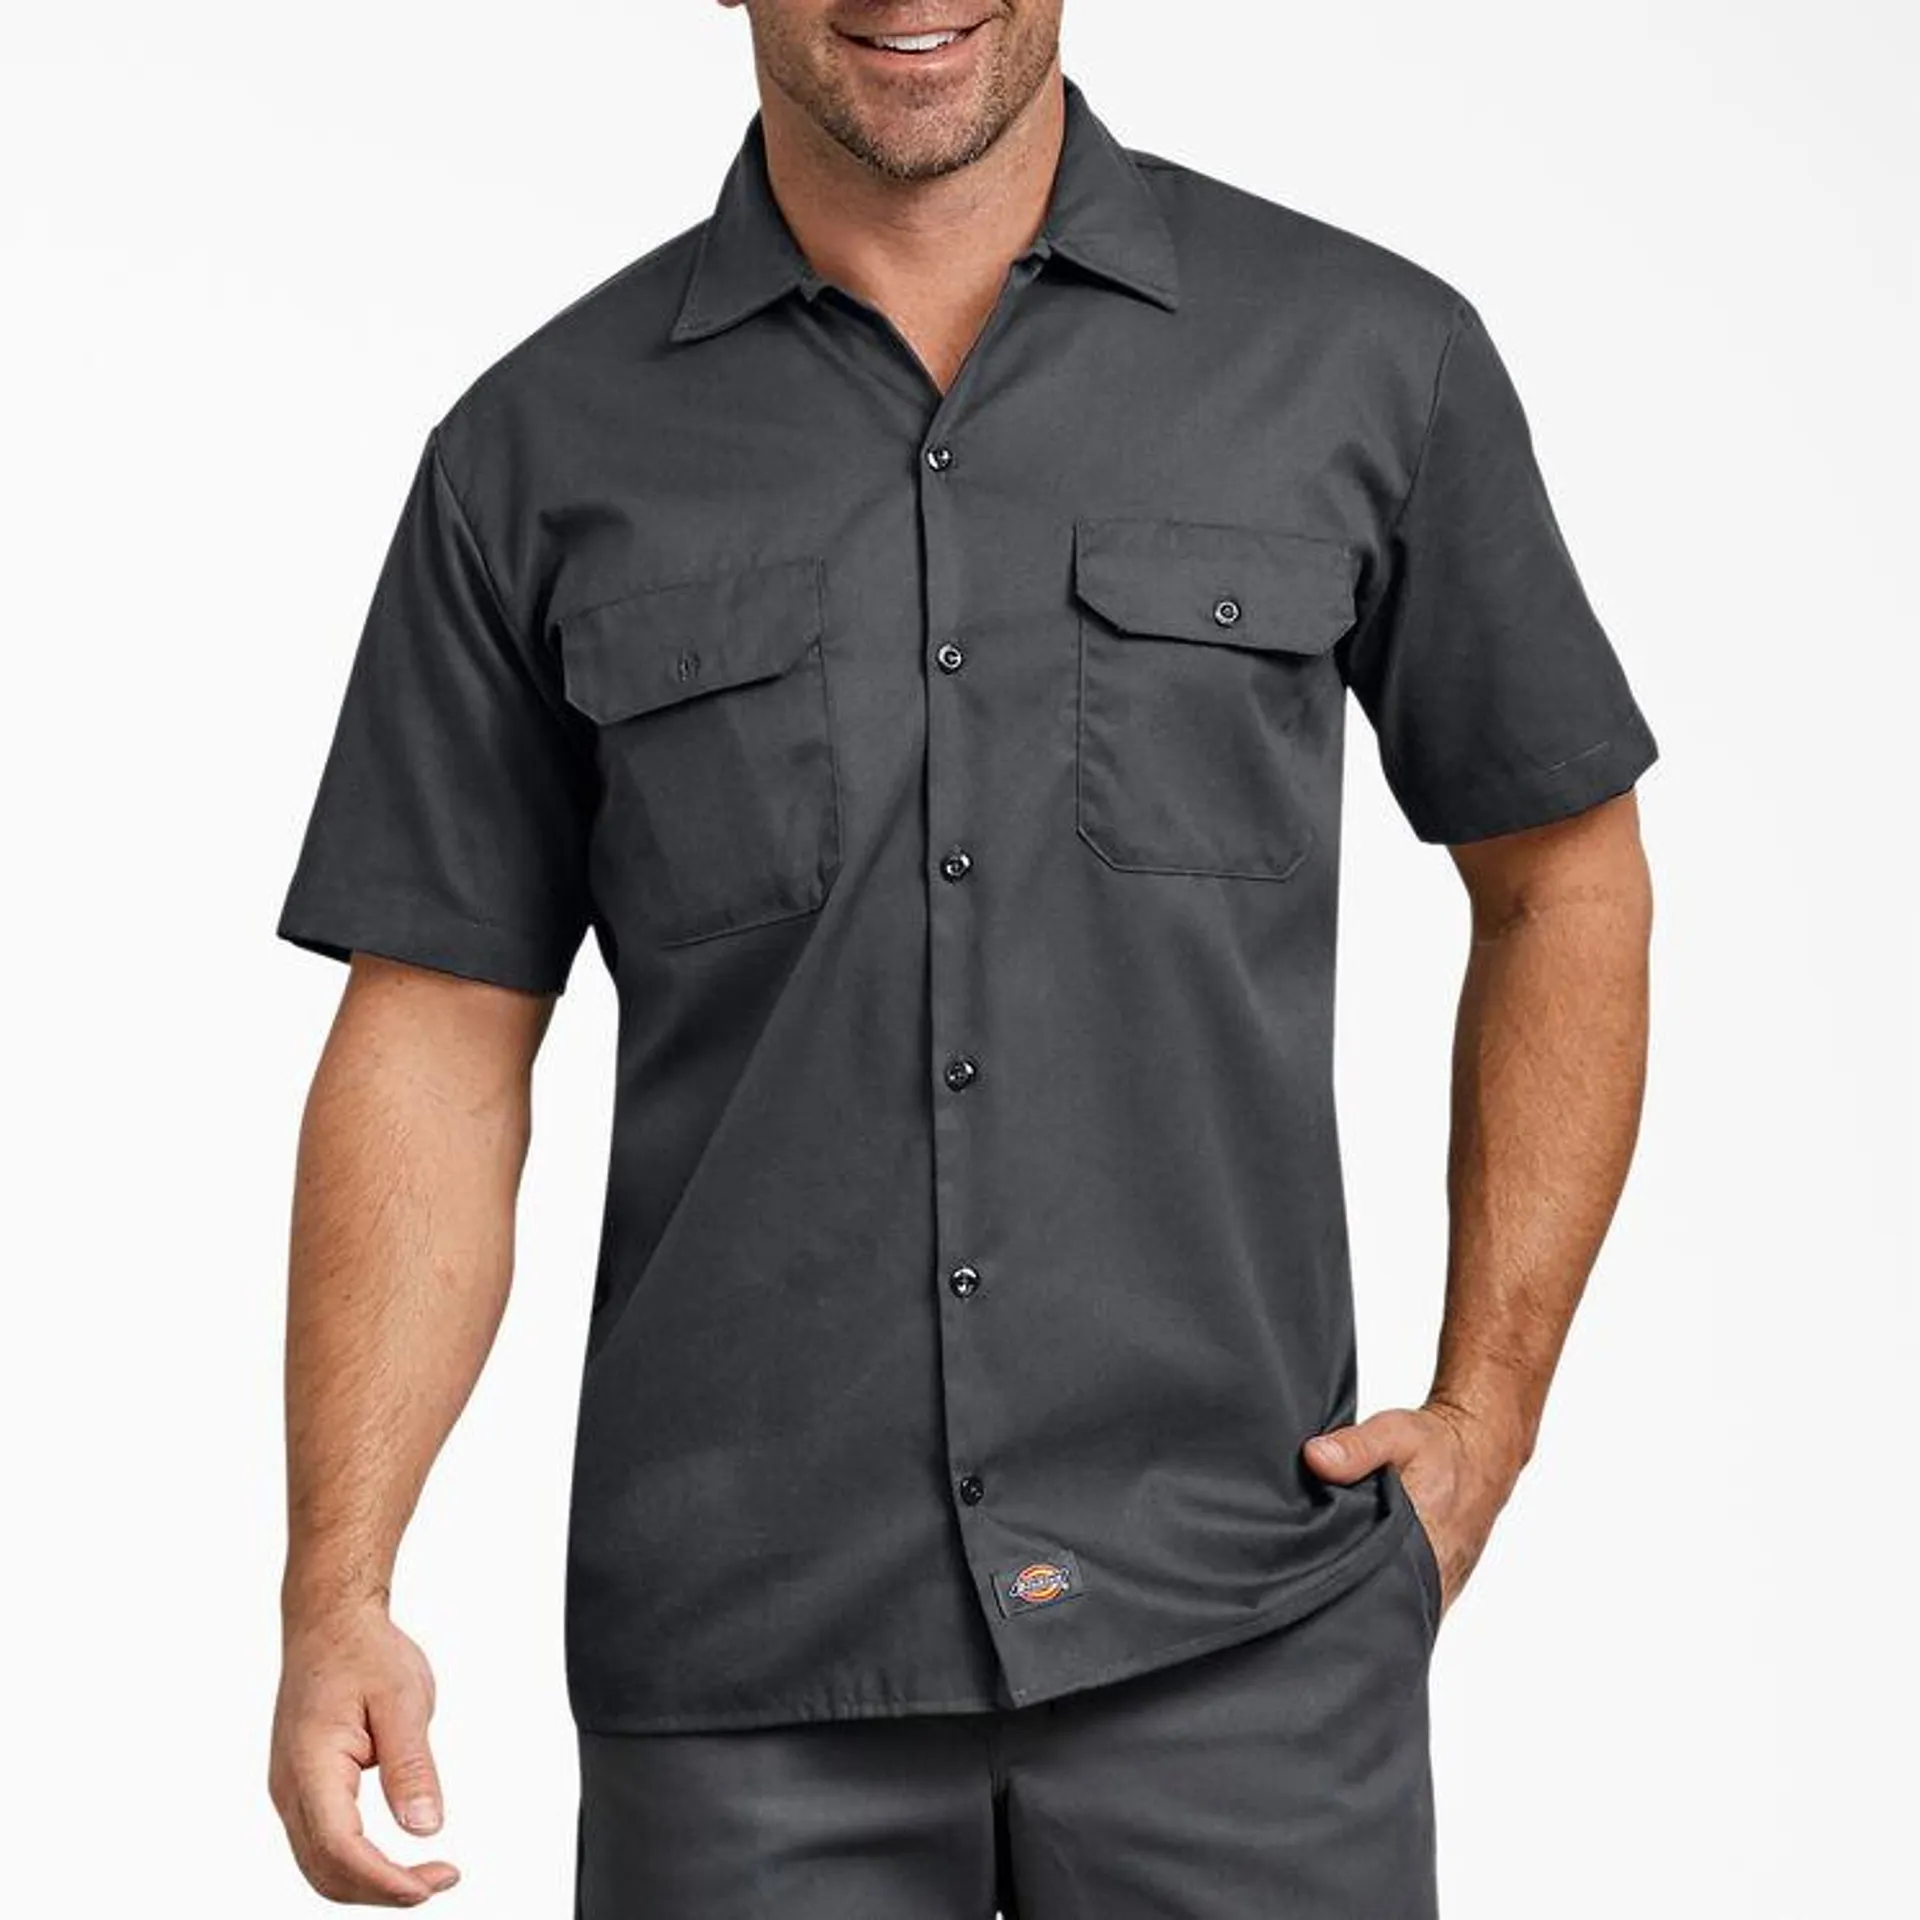 Relaxed Fit Short Sleeve Work Shirt, Charcoal Gray